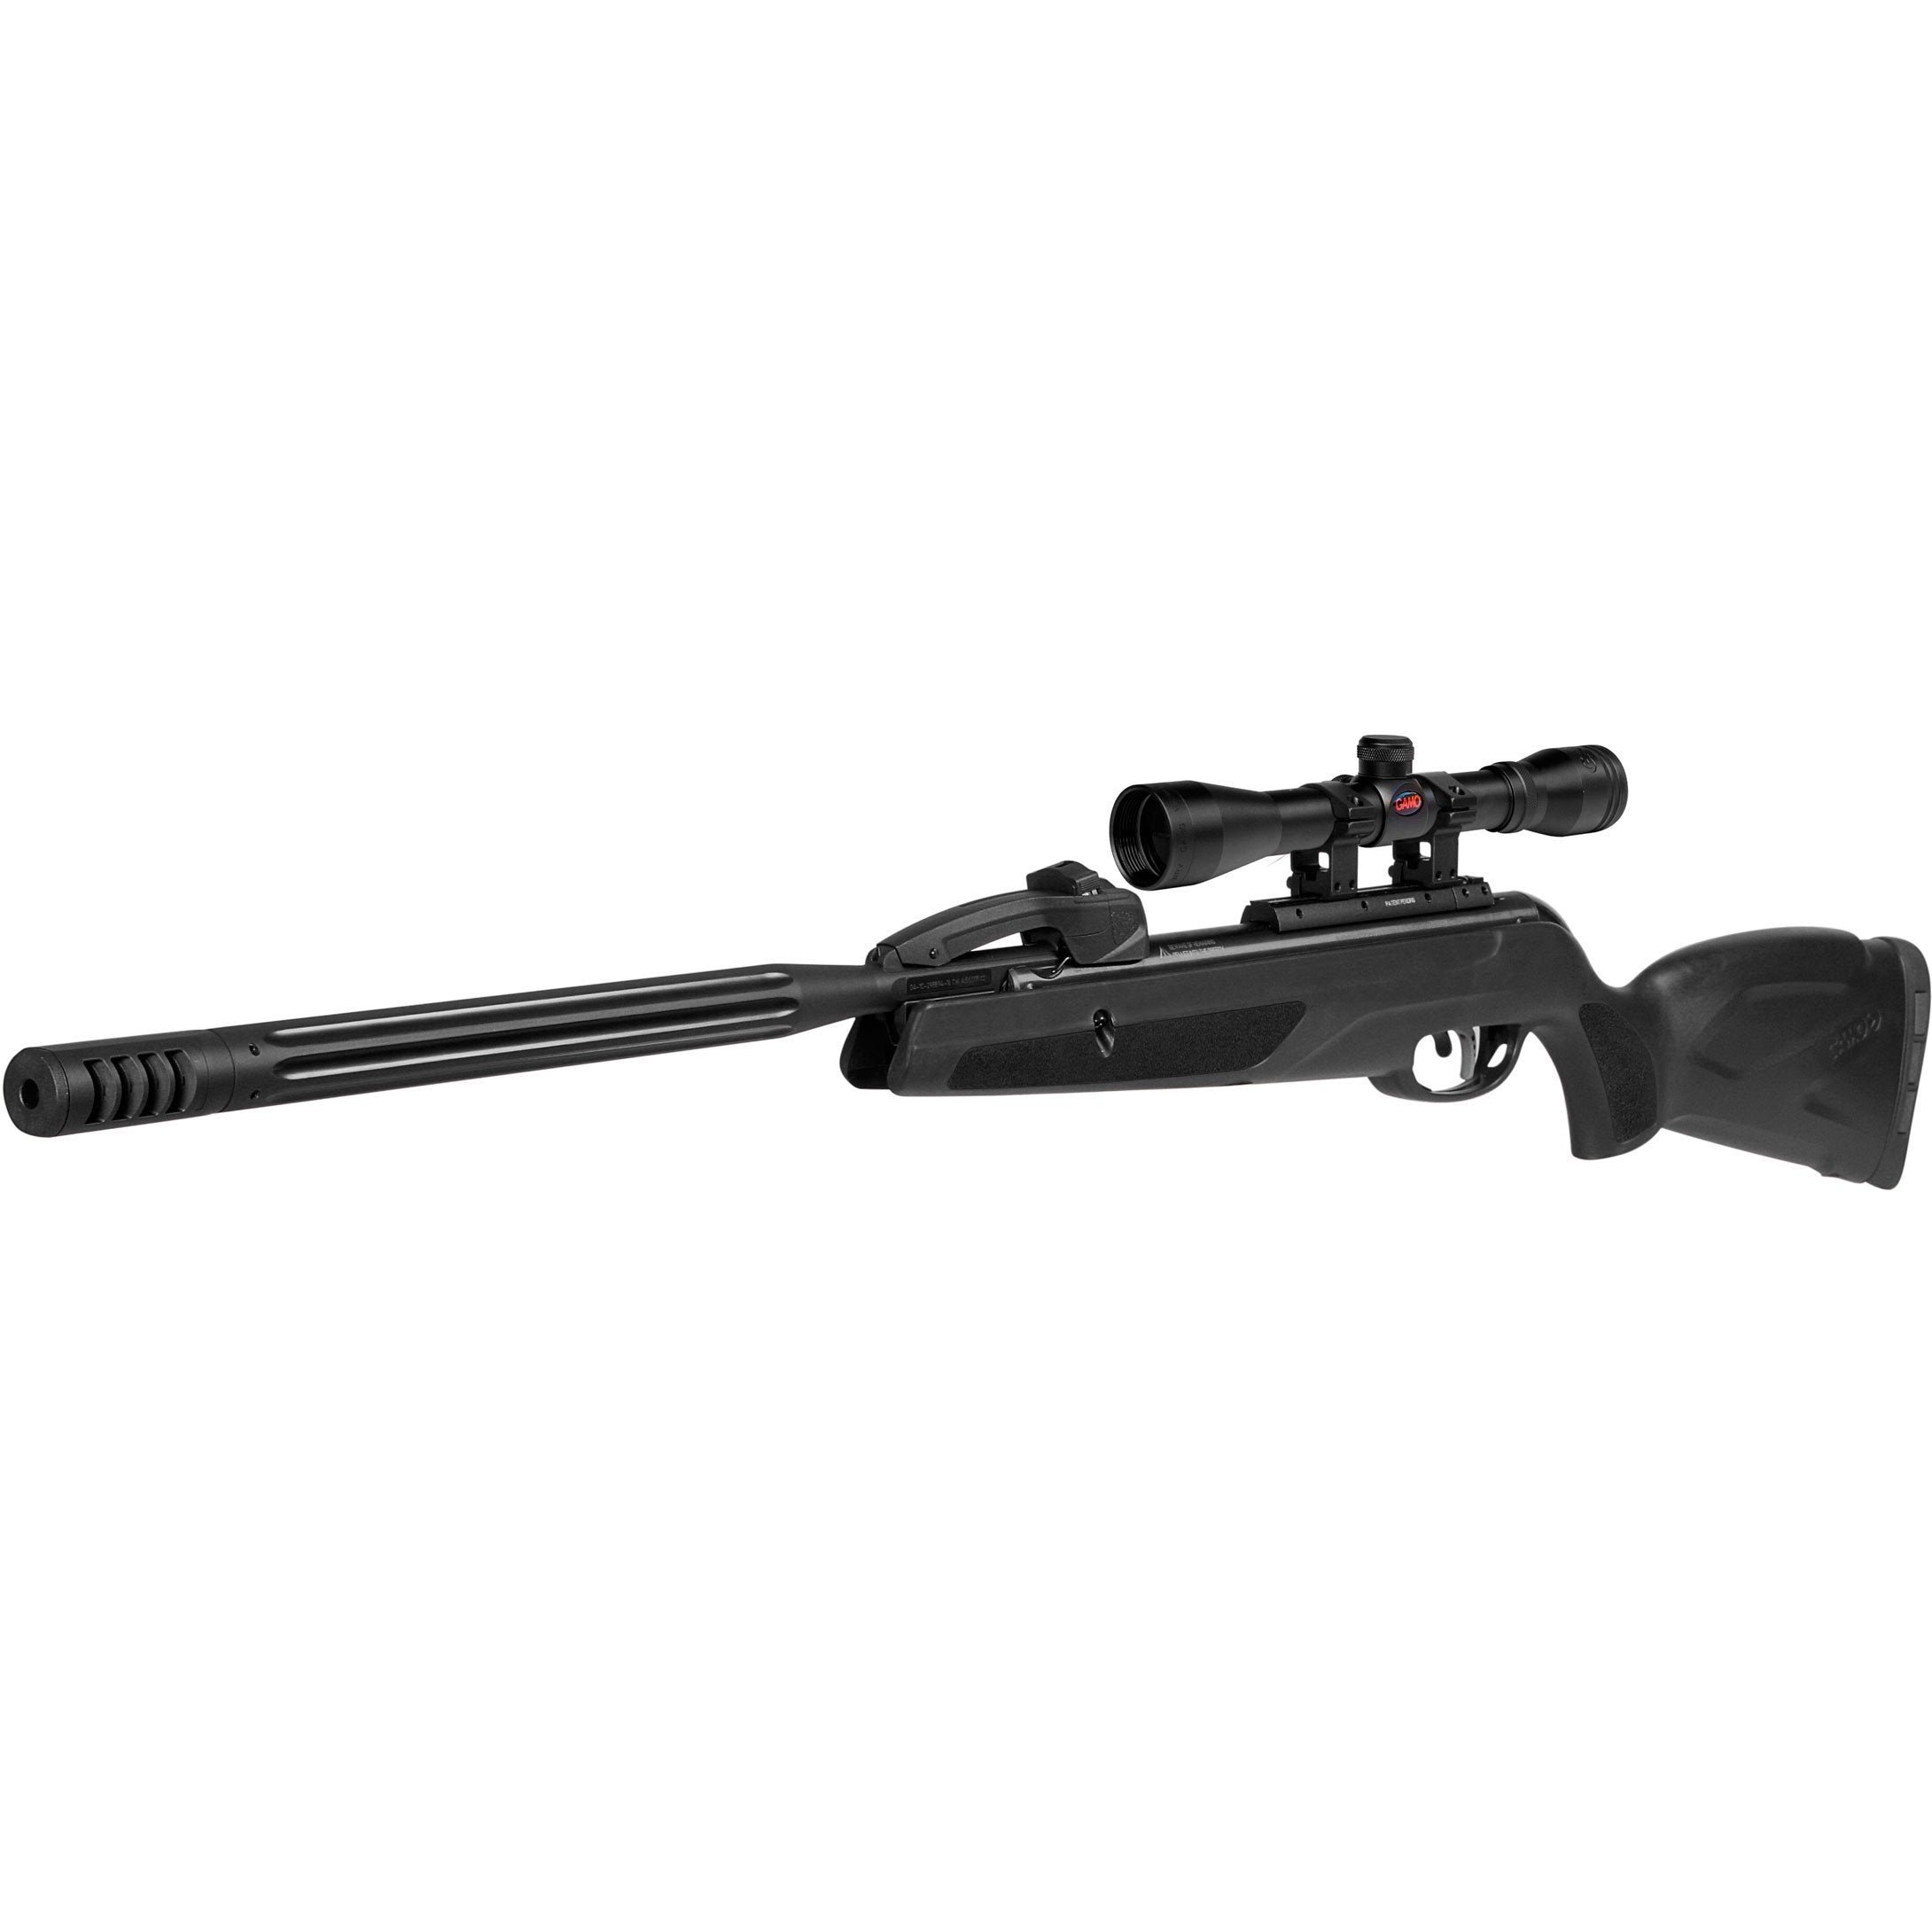 Gamo Replay 10 Air Rifle | 5.5mm/ .22 | 10 Pellet Auto Loading System